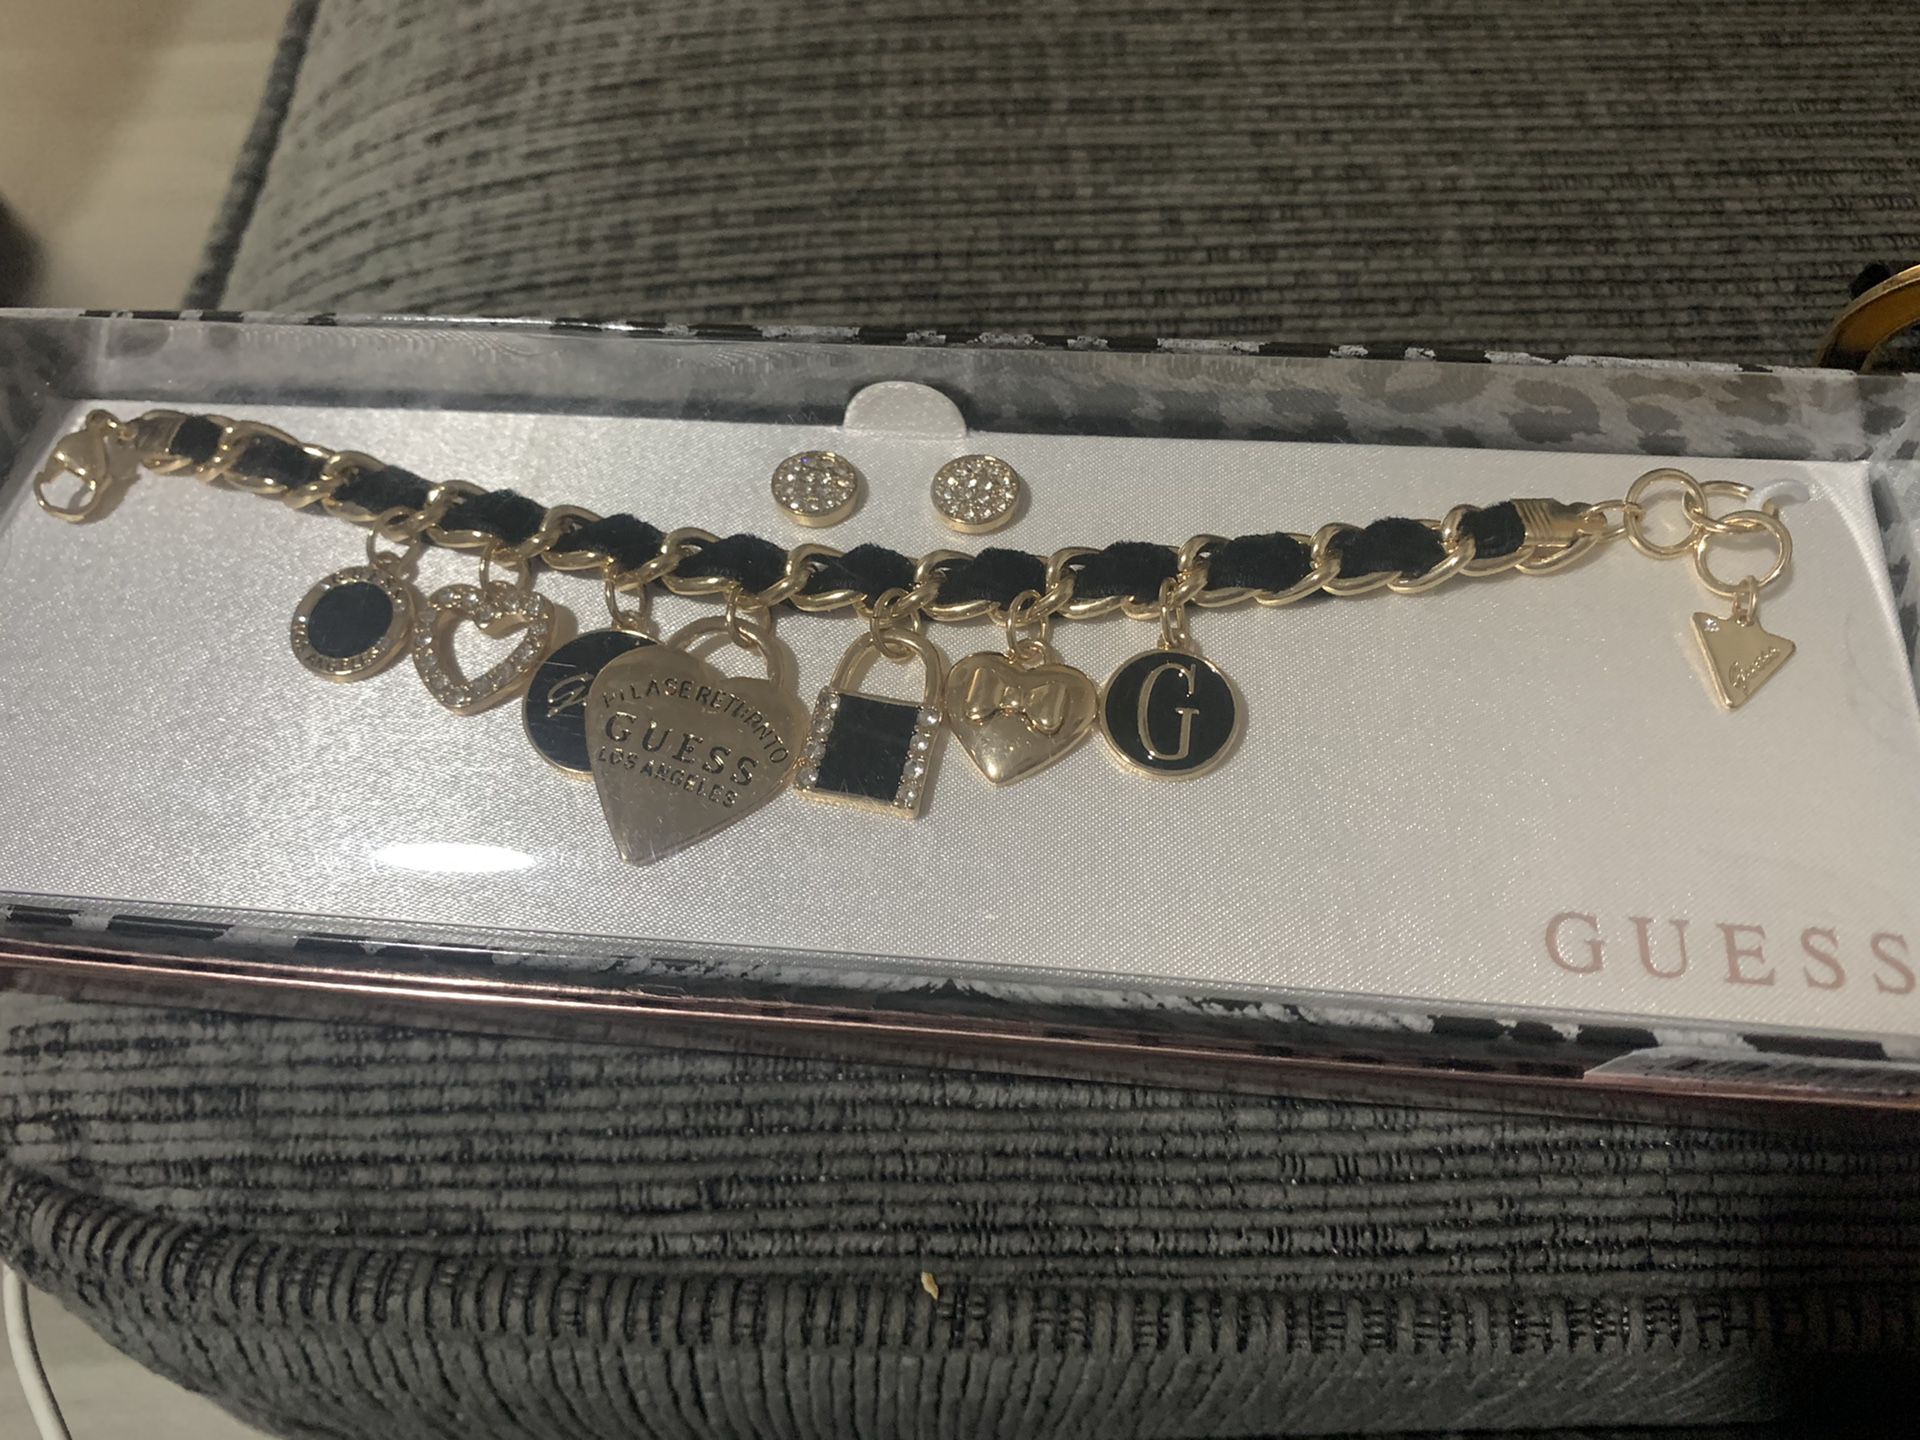 New Guess bracelet set with earrings